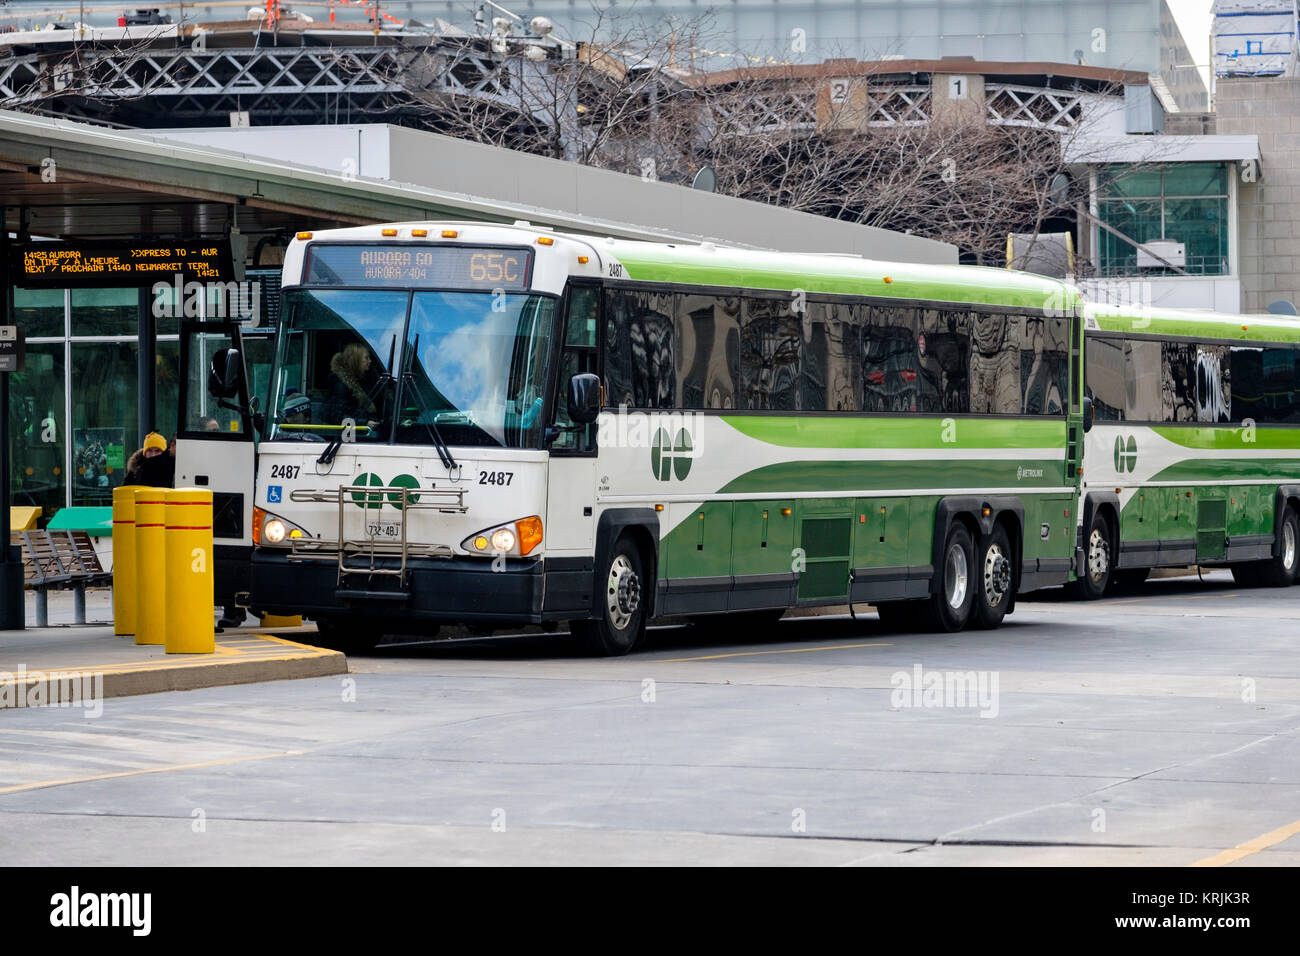 Union Station Bus Terminal, go buses used for public transportation of commuters living in the GTA region, downtown Toronto, Ontario, Canada. Stock Photo